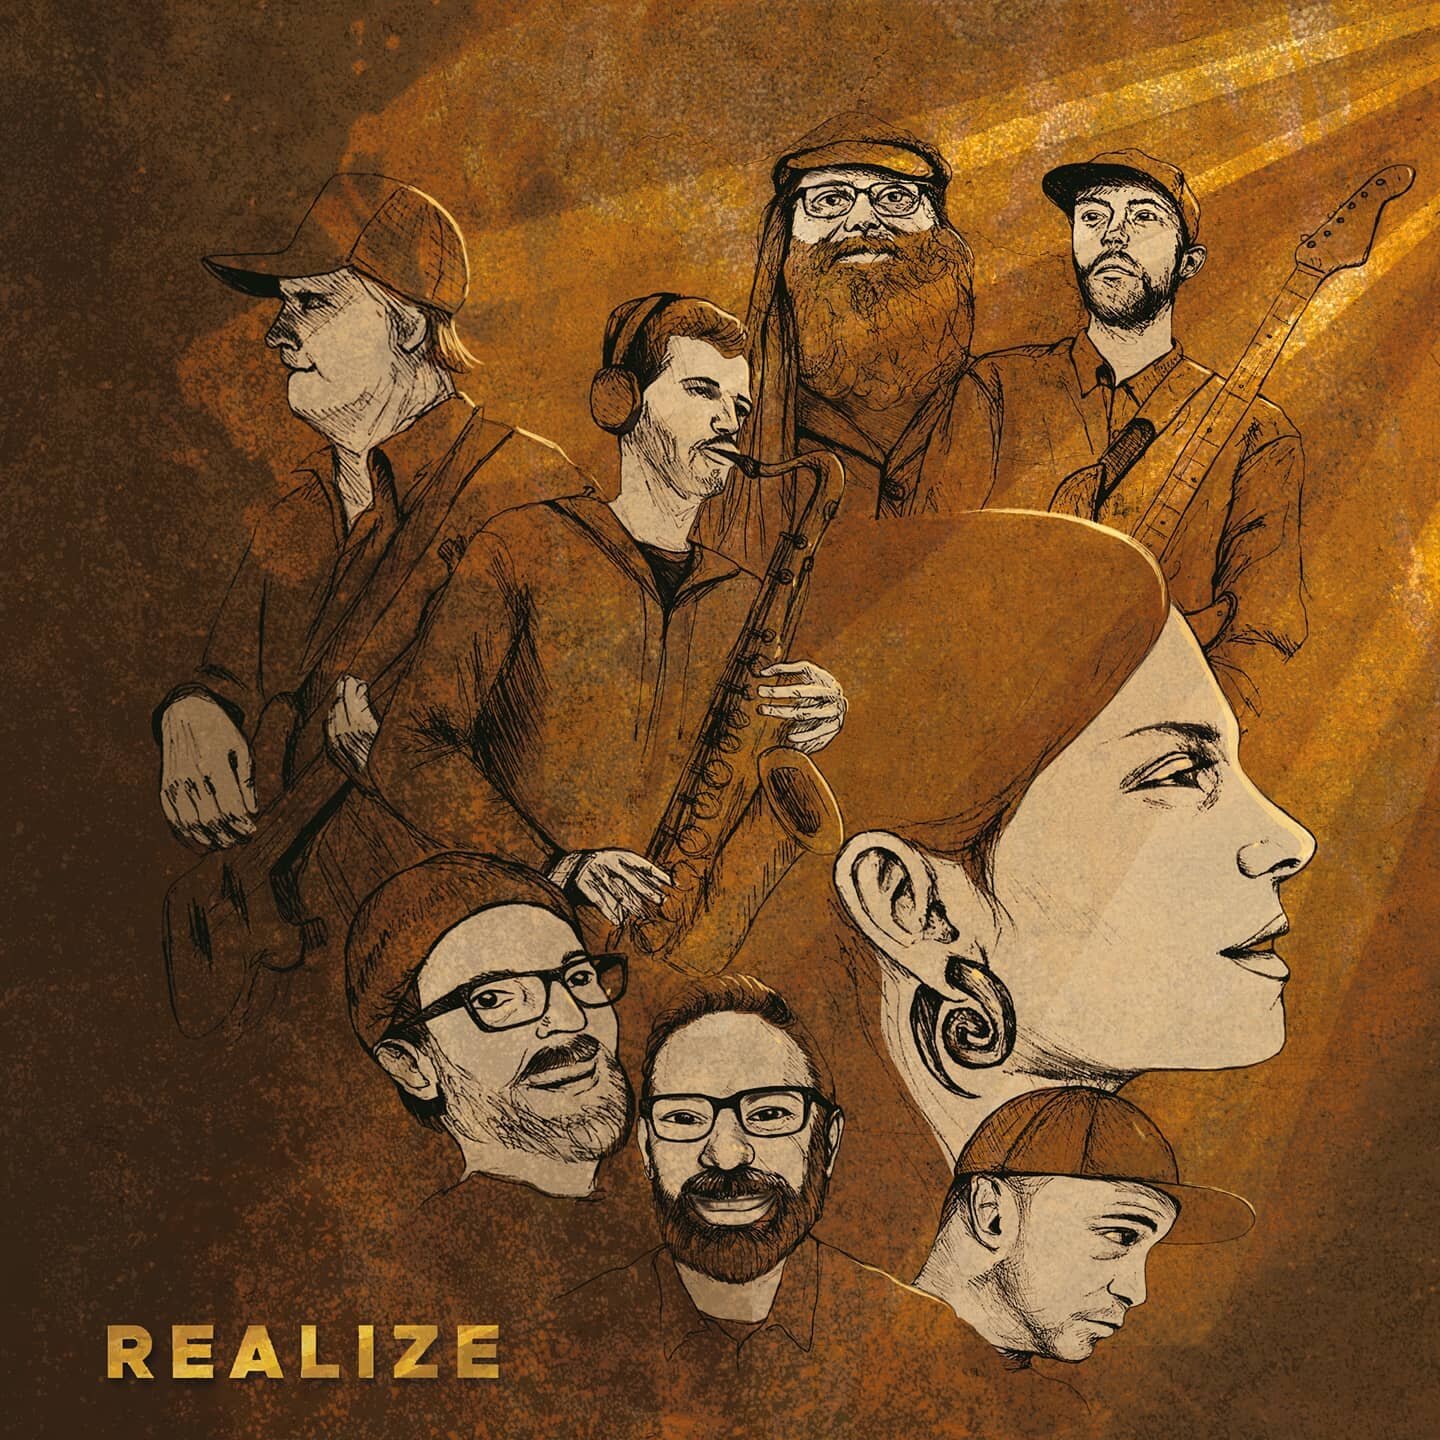 🔊🔊🔊 SOUND UP!!! ❤️💛💚
#REALIZE available Worldwide! 
.
We did it! We are so excited to finally be sharing these tunes! Check the link in the bio for all download/streaming links and share the vibe! 🙏🙌
.
Massive #GRATITUDE and HUGE #RESPECT to @